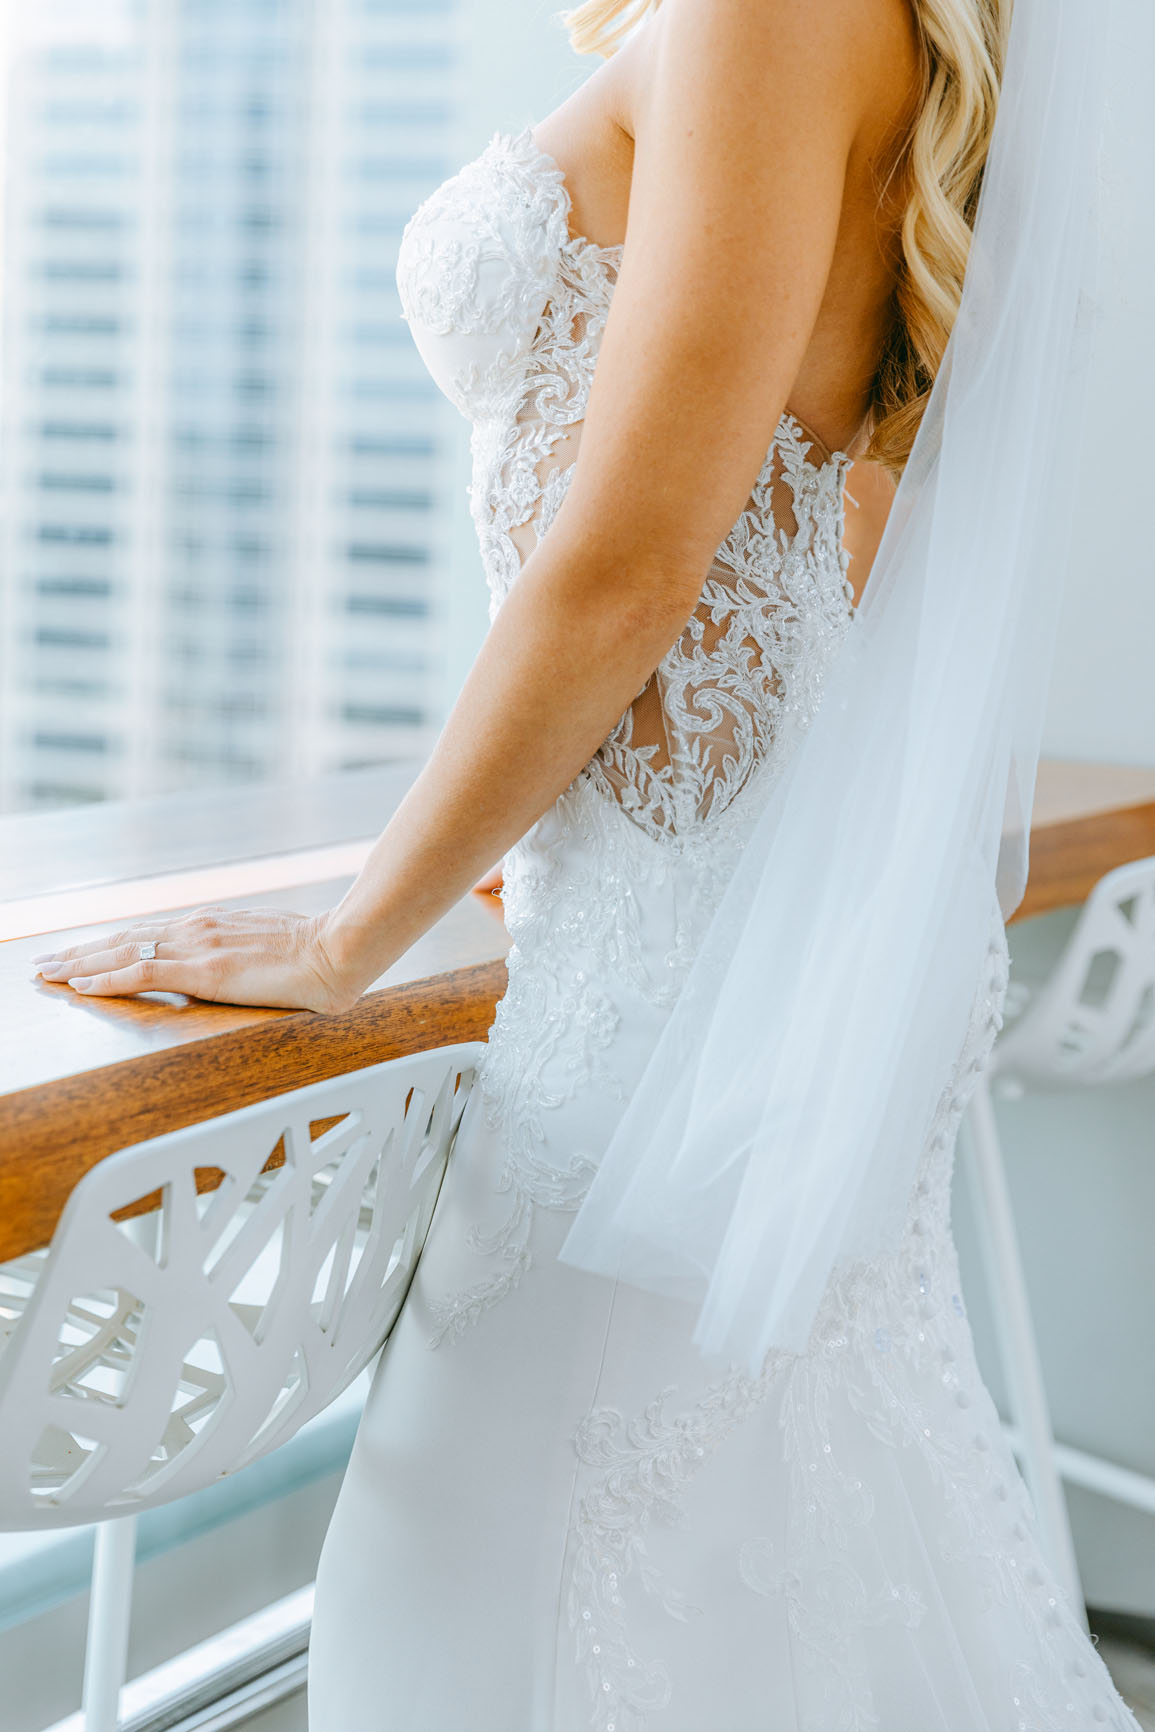 Bride dress details at merchant & trade rooftop in Charlotte nc shot by Nhieu Tang Photography | nhieutang.com